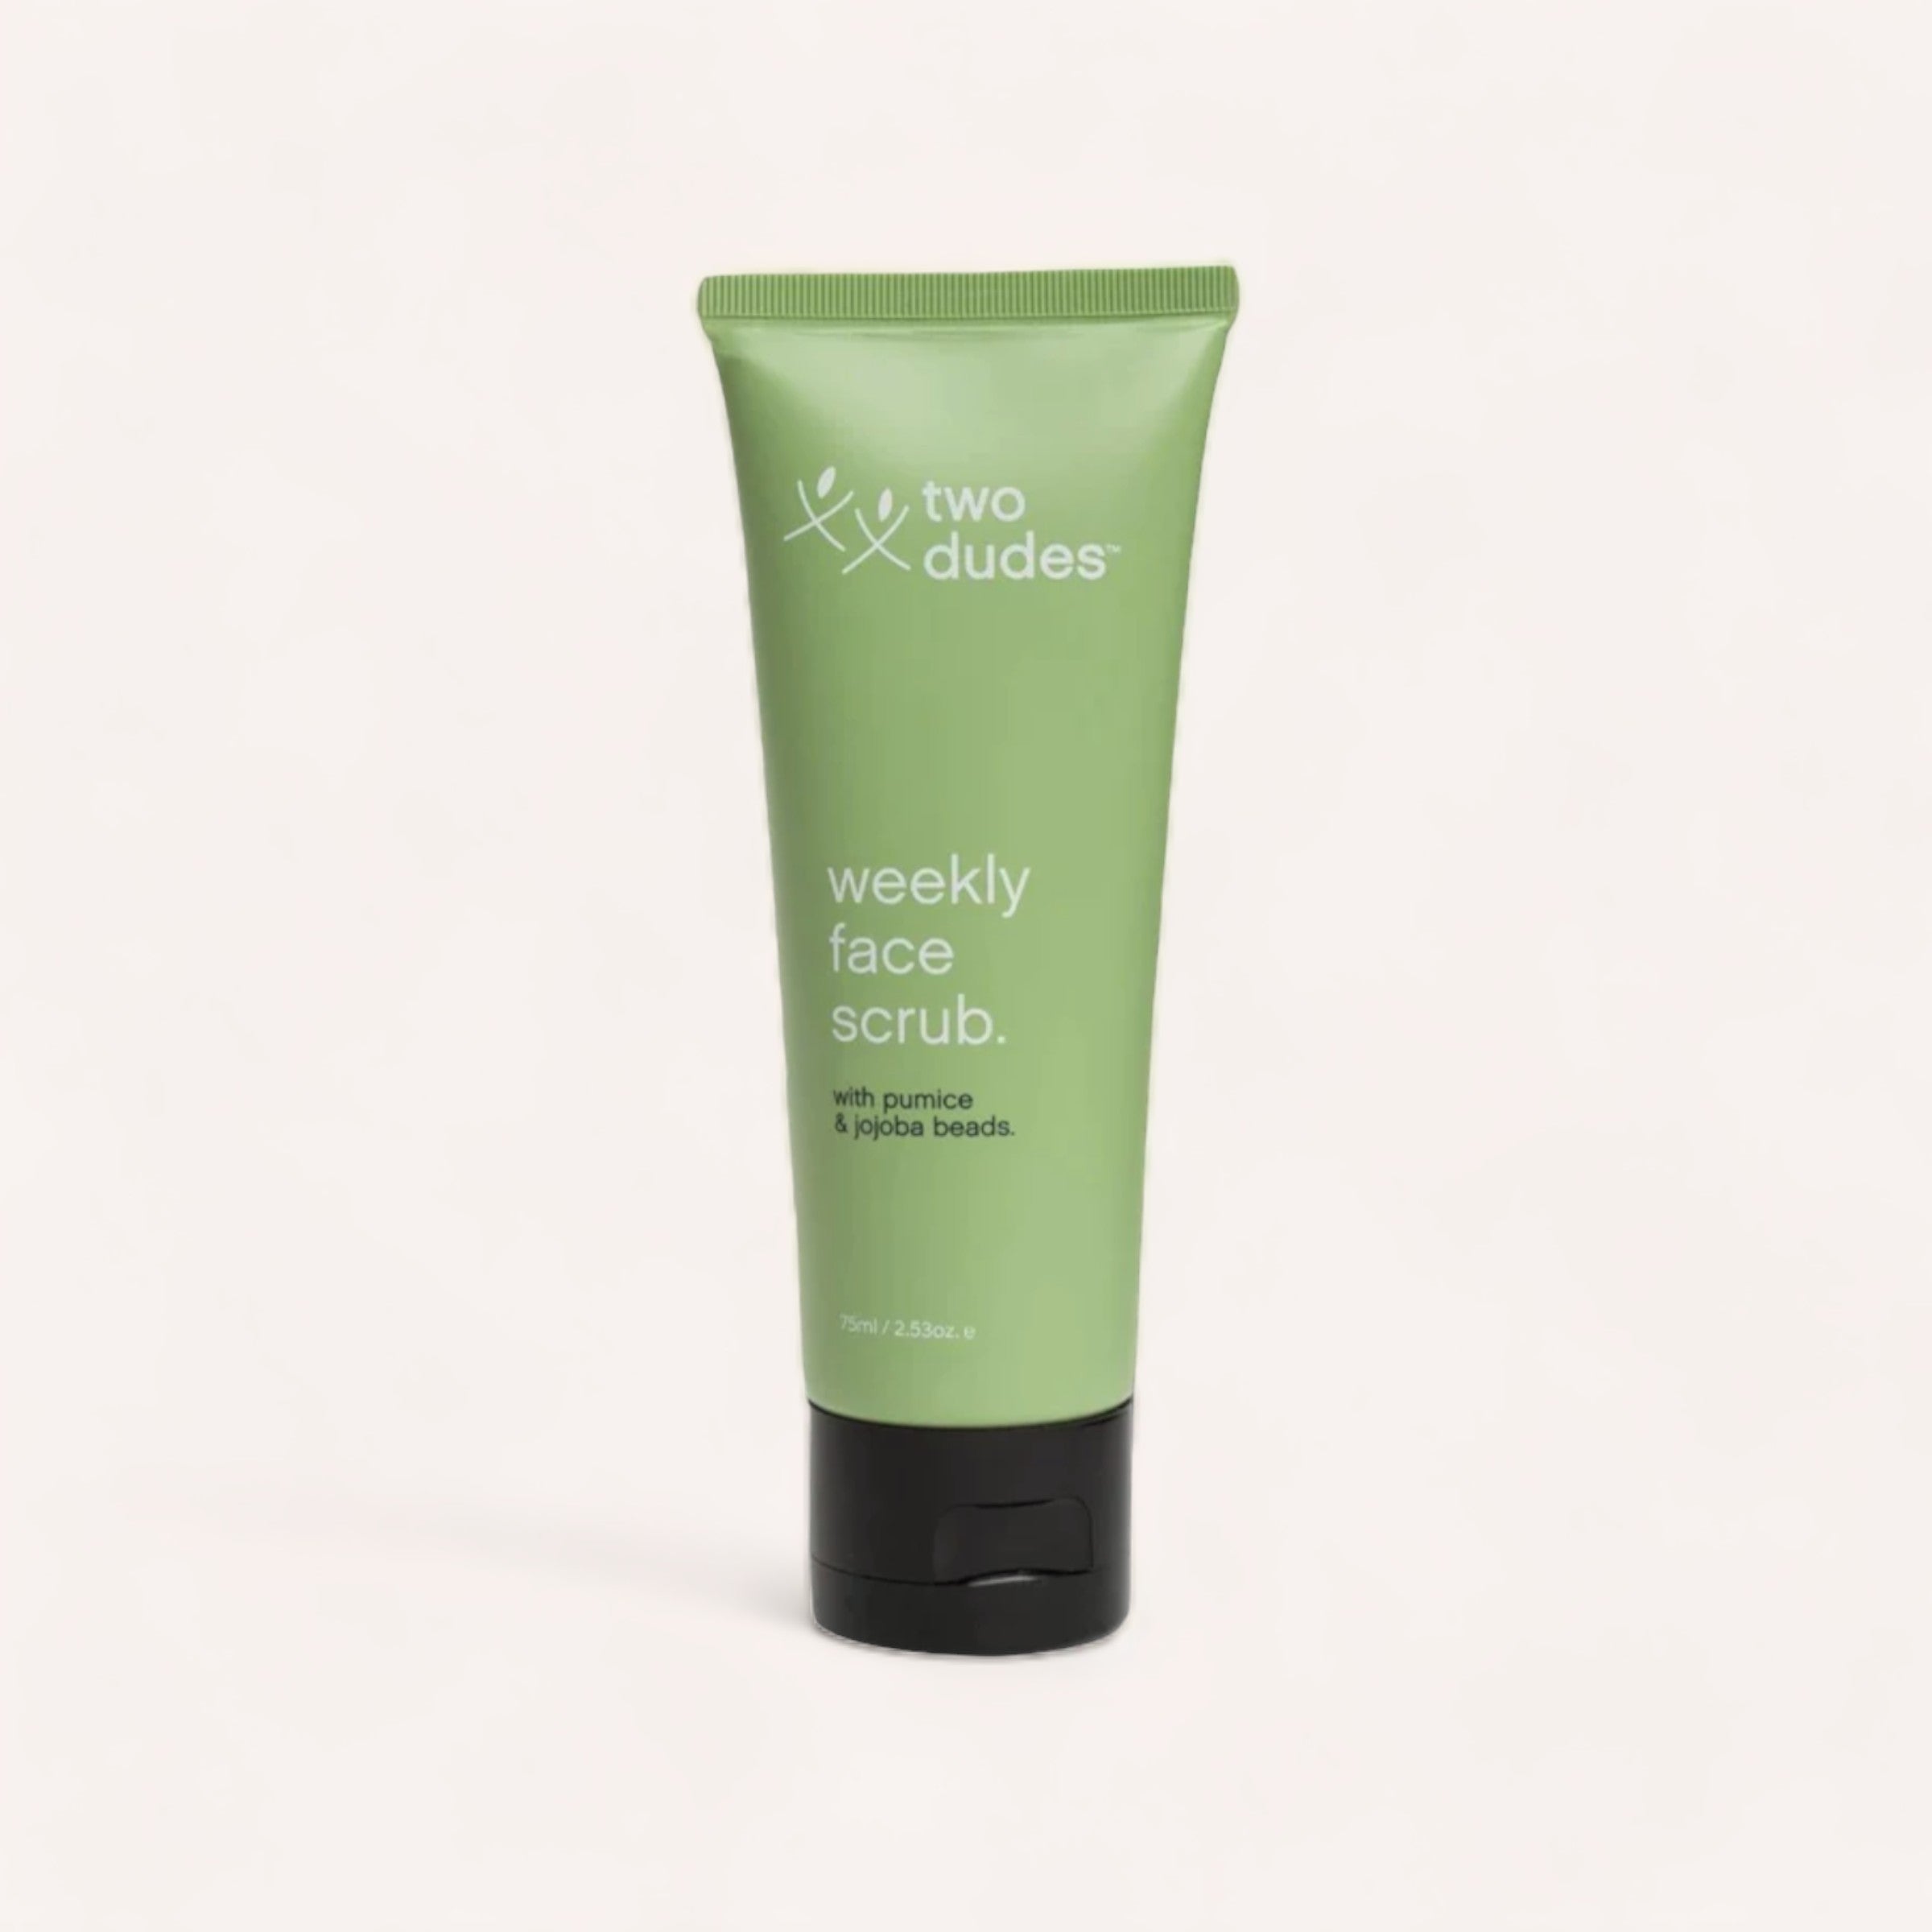 A tube of "Weekly Face Scrub by Two Dudes" against a clean, white background.